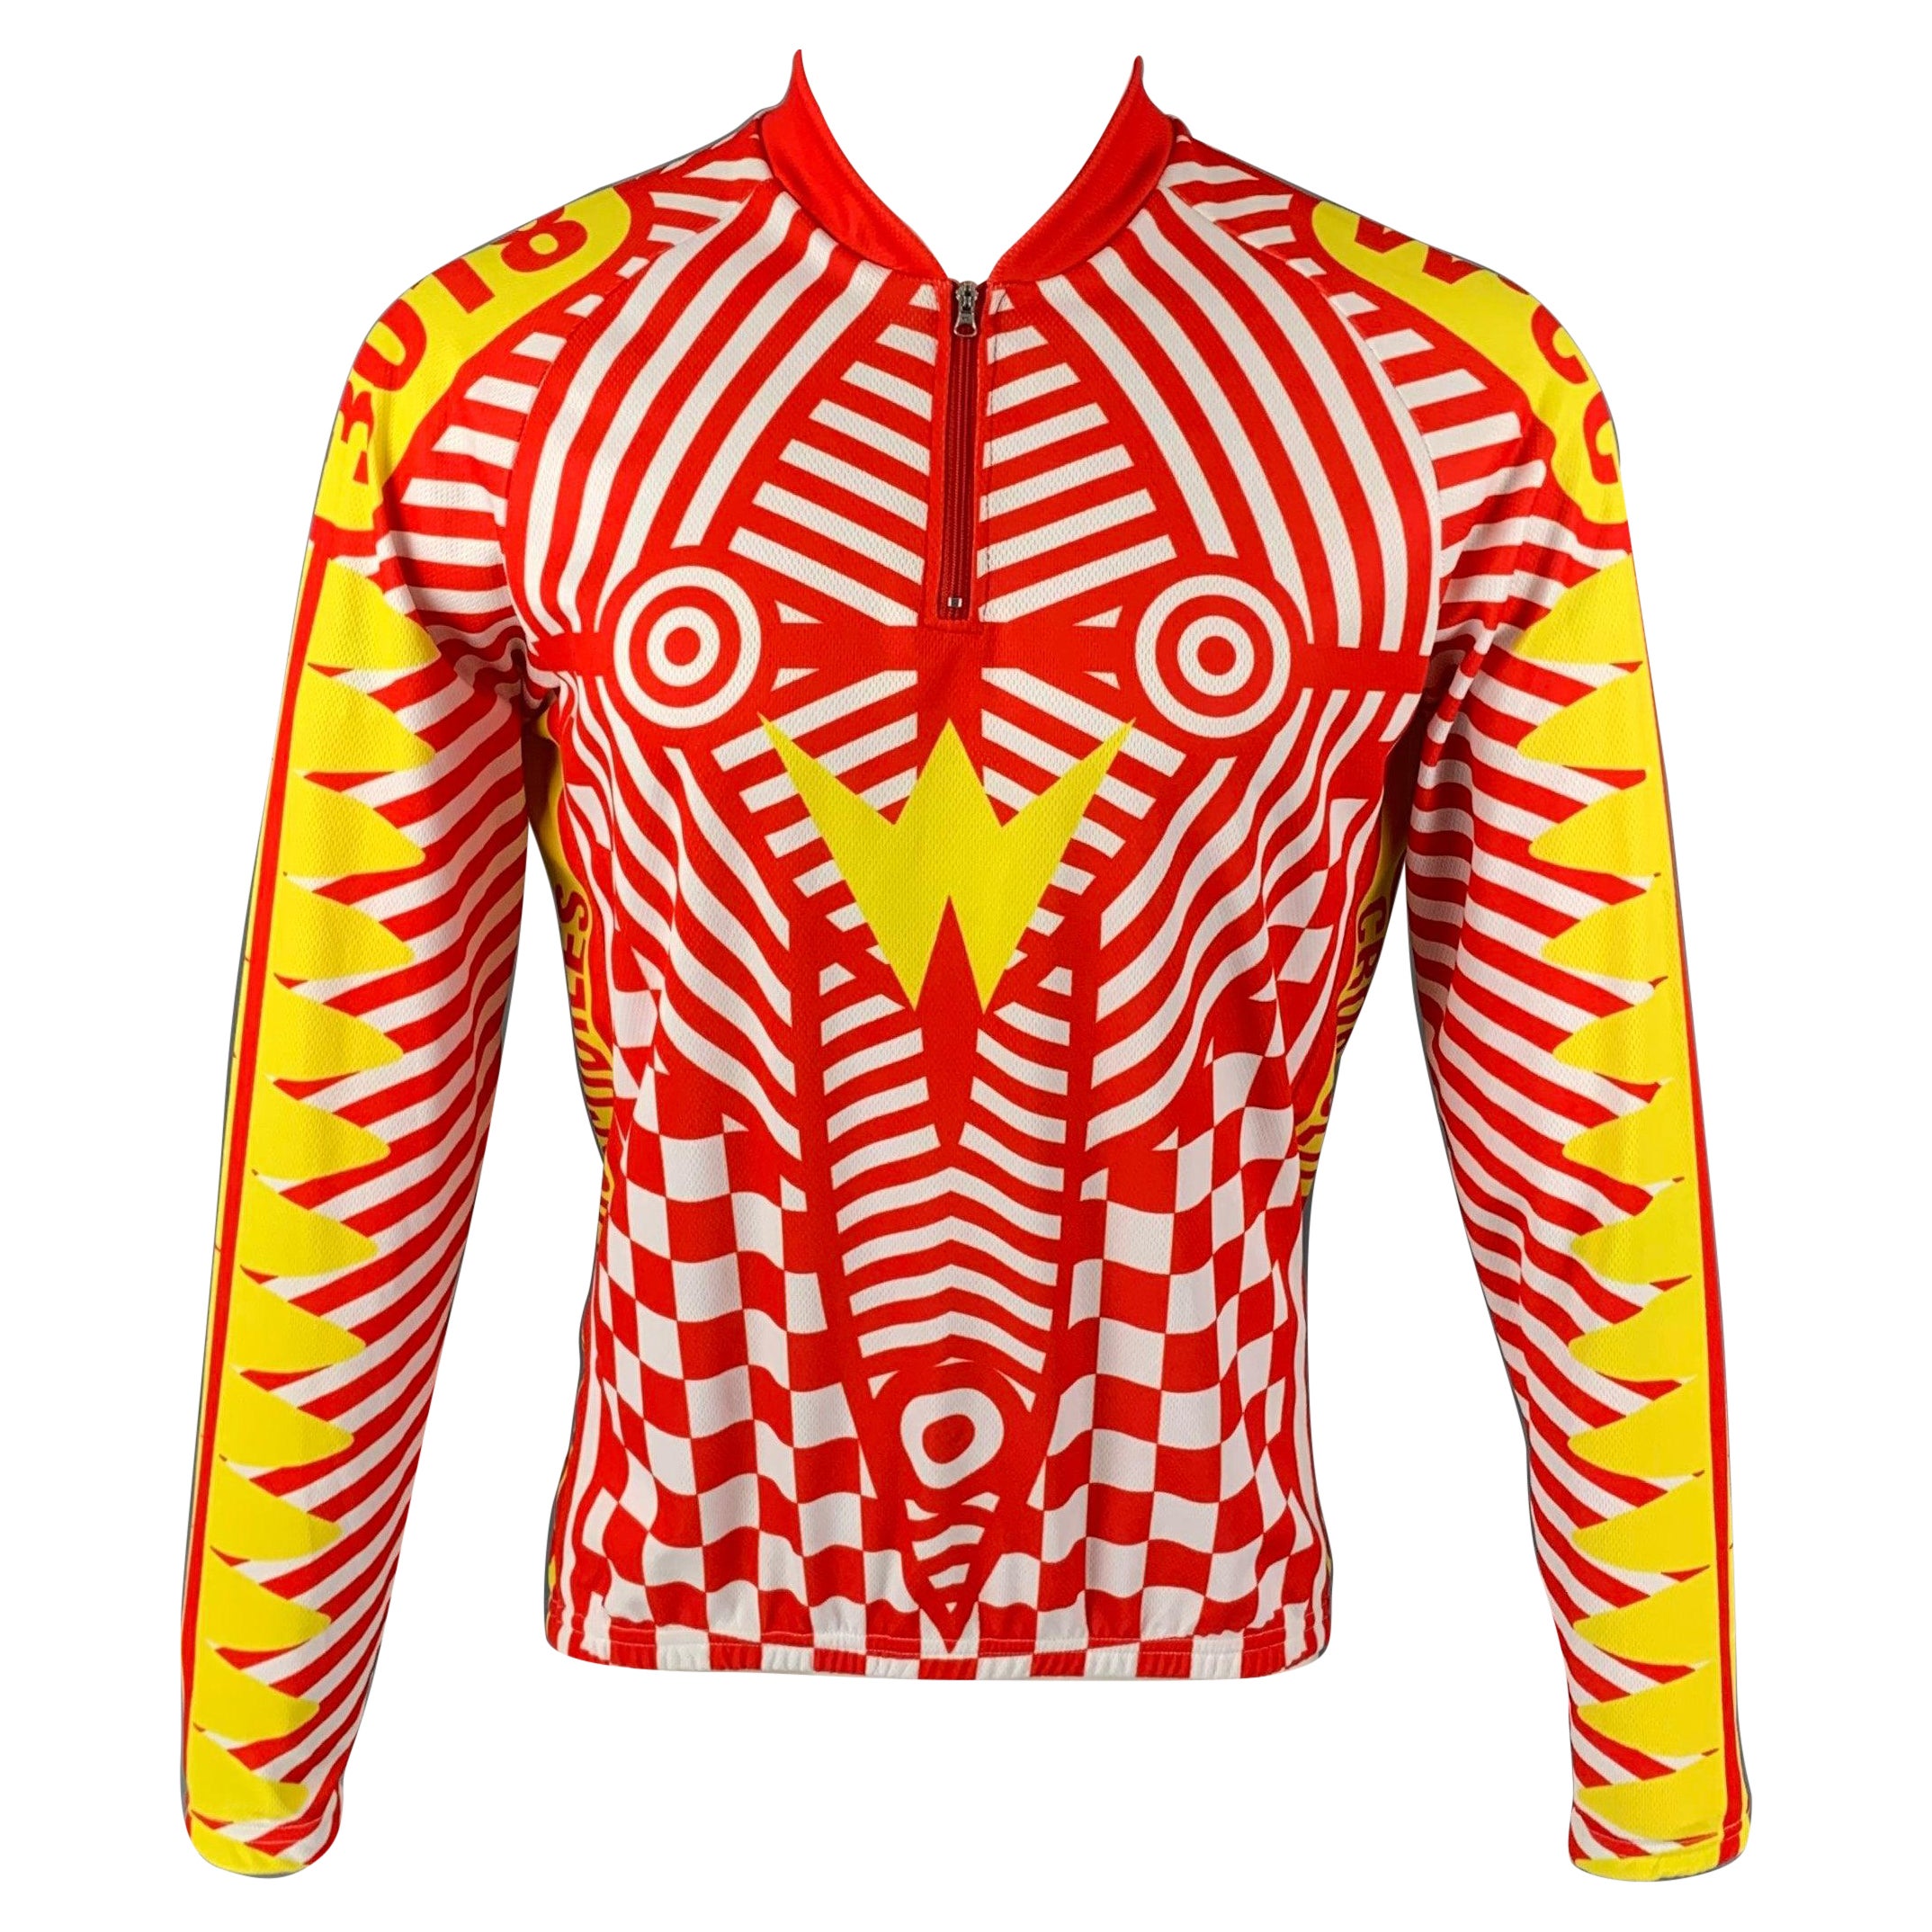 WALTER VAN BEIRENDONCK FW14 Size XL Red White Graphic Nylon Jersey Bike Top For Sale